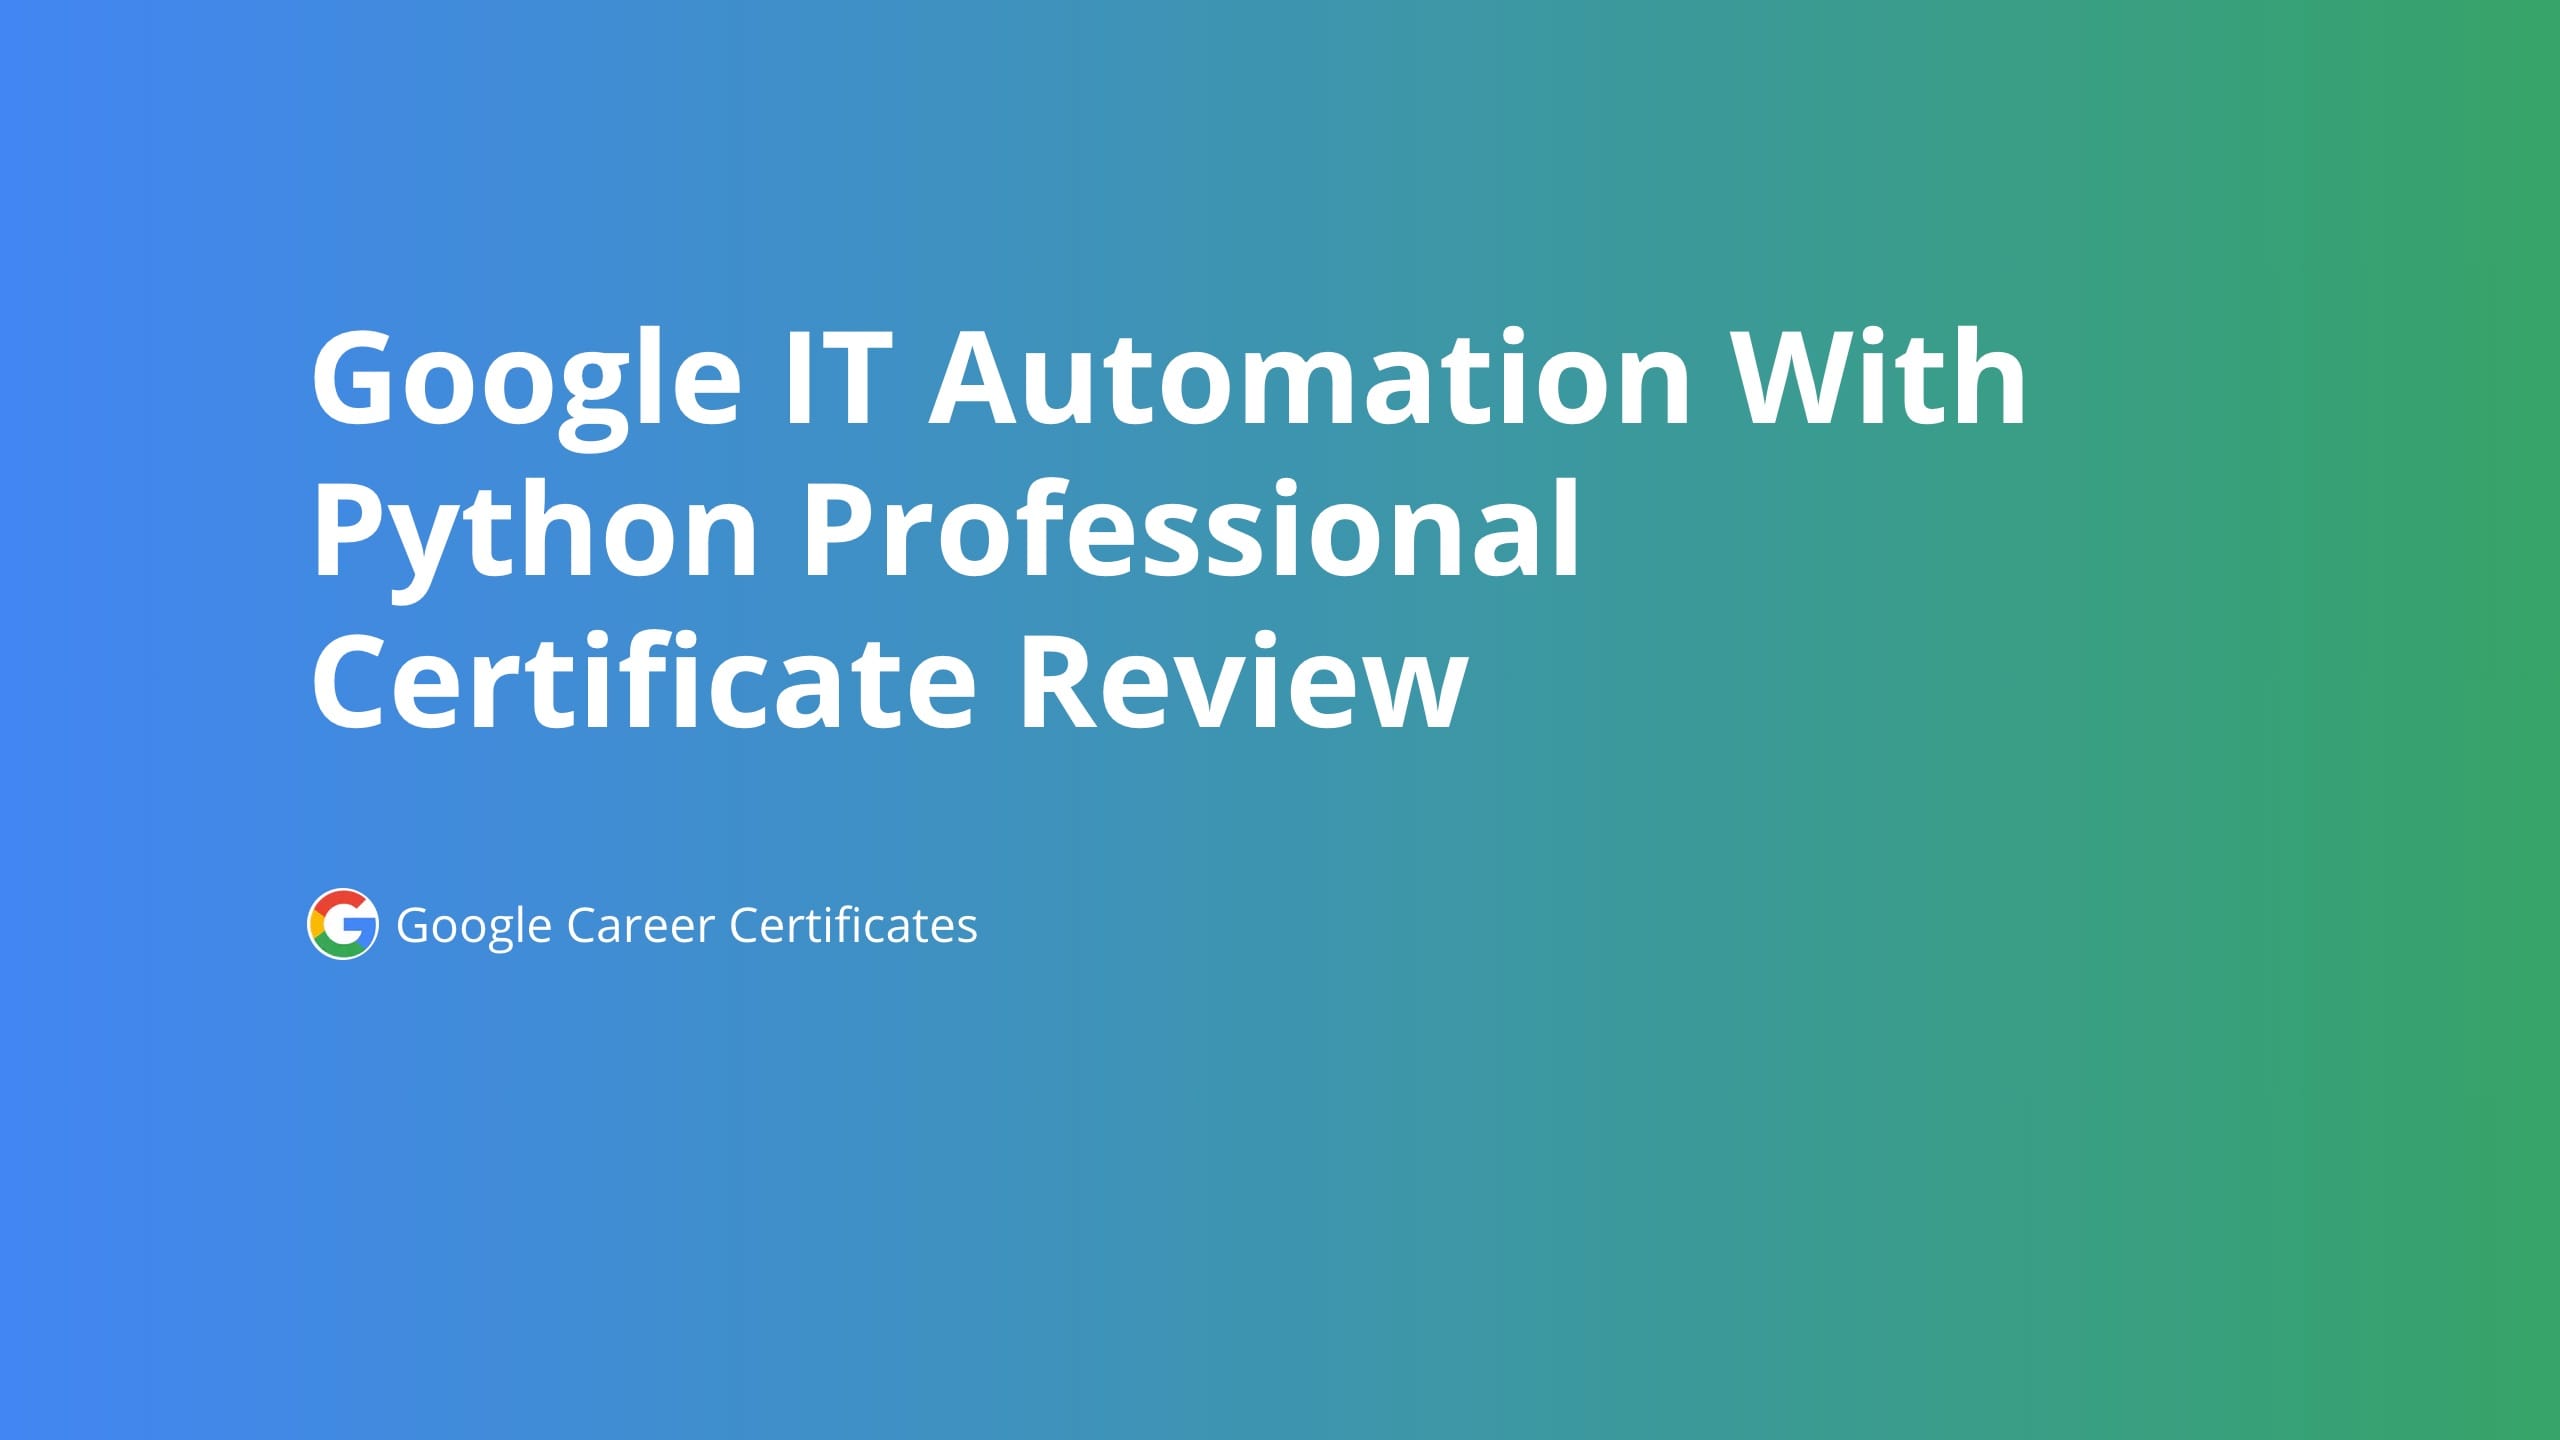 Google IT Automation With Python Professional Certificate